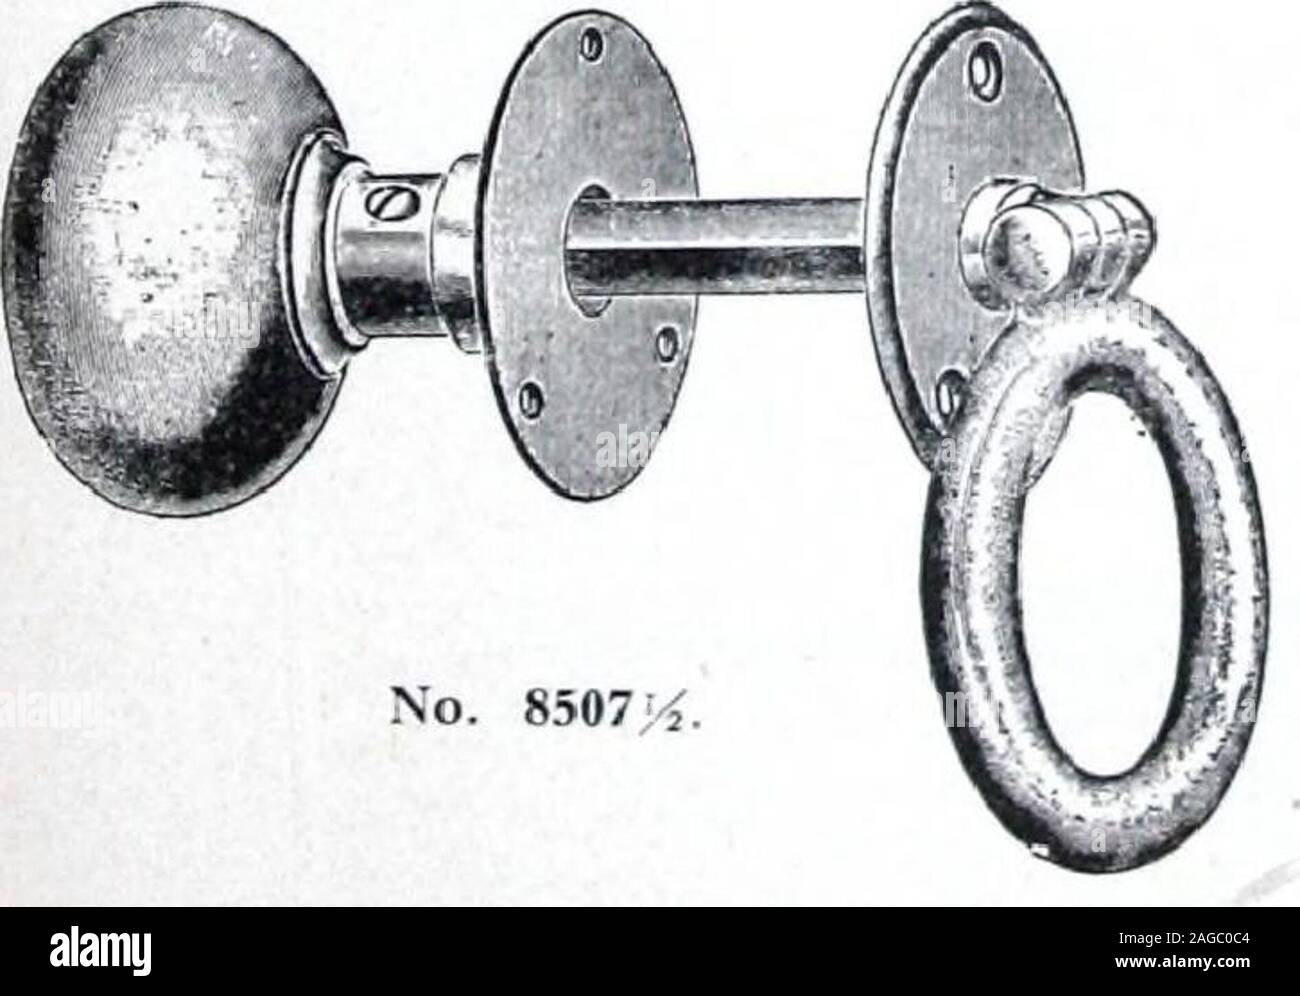 . Illustrated Catalogue of Locks and Builders Hardware. No. 8506, etc.. No. 8507&gt;^. -^ X 3 in..^K in. Spindlr.No. 8531—Cast Hron/f, iolishud. DROP RING HANDLE .WD KNOB Knob No. 8537 1^ x 2}^ in.Ring Handle—2K x 2 in.% in Spindle. No. 8506—SuIkI Uronze, luli:?liL(l. Kc-yuiar Spindle.No. A8506 --Solid Hronze, Pulishi.-d, Sini|iIt.- .S[)in(lle. With Knob No. «516--2 x 2 In. No. 8506.^—Solid Bronze. Poli-^lifd. Rctiular Spindle.No. A8506&gt;^—Solid iironze, PolisliLd, Simplex Spindle. Weighl per dozen pairs, 11 lbs. DROP RING HANDLE AND KNOB Knob .No. 8537—2^ x 2}4 in.Ring—2&gt;^ in.% in. Spin Stock Photo